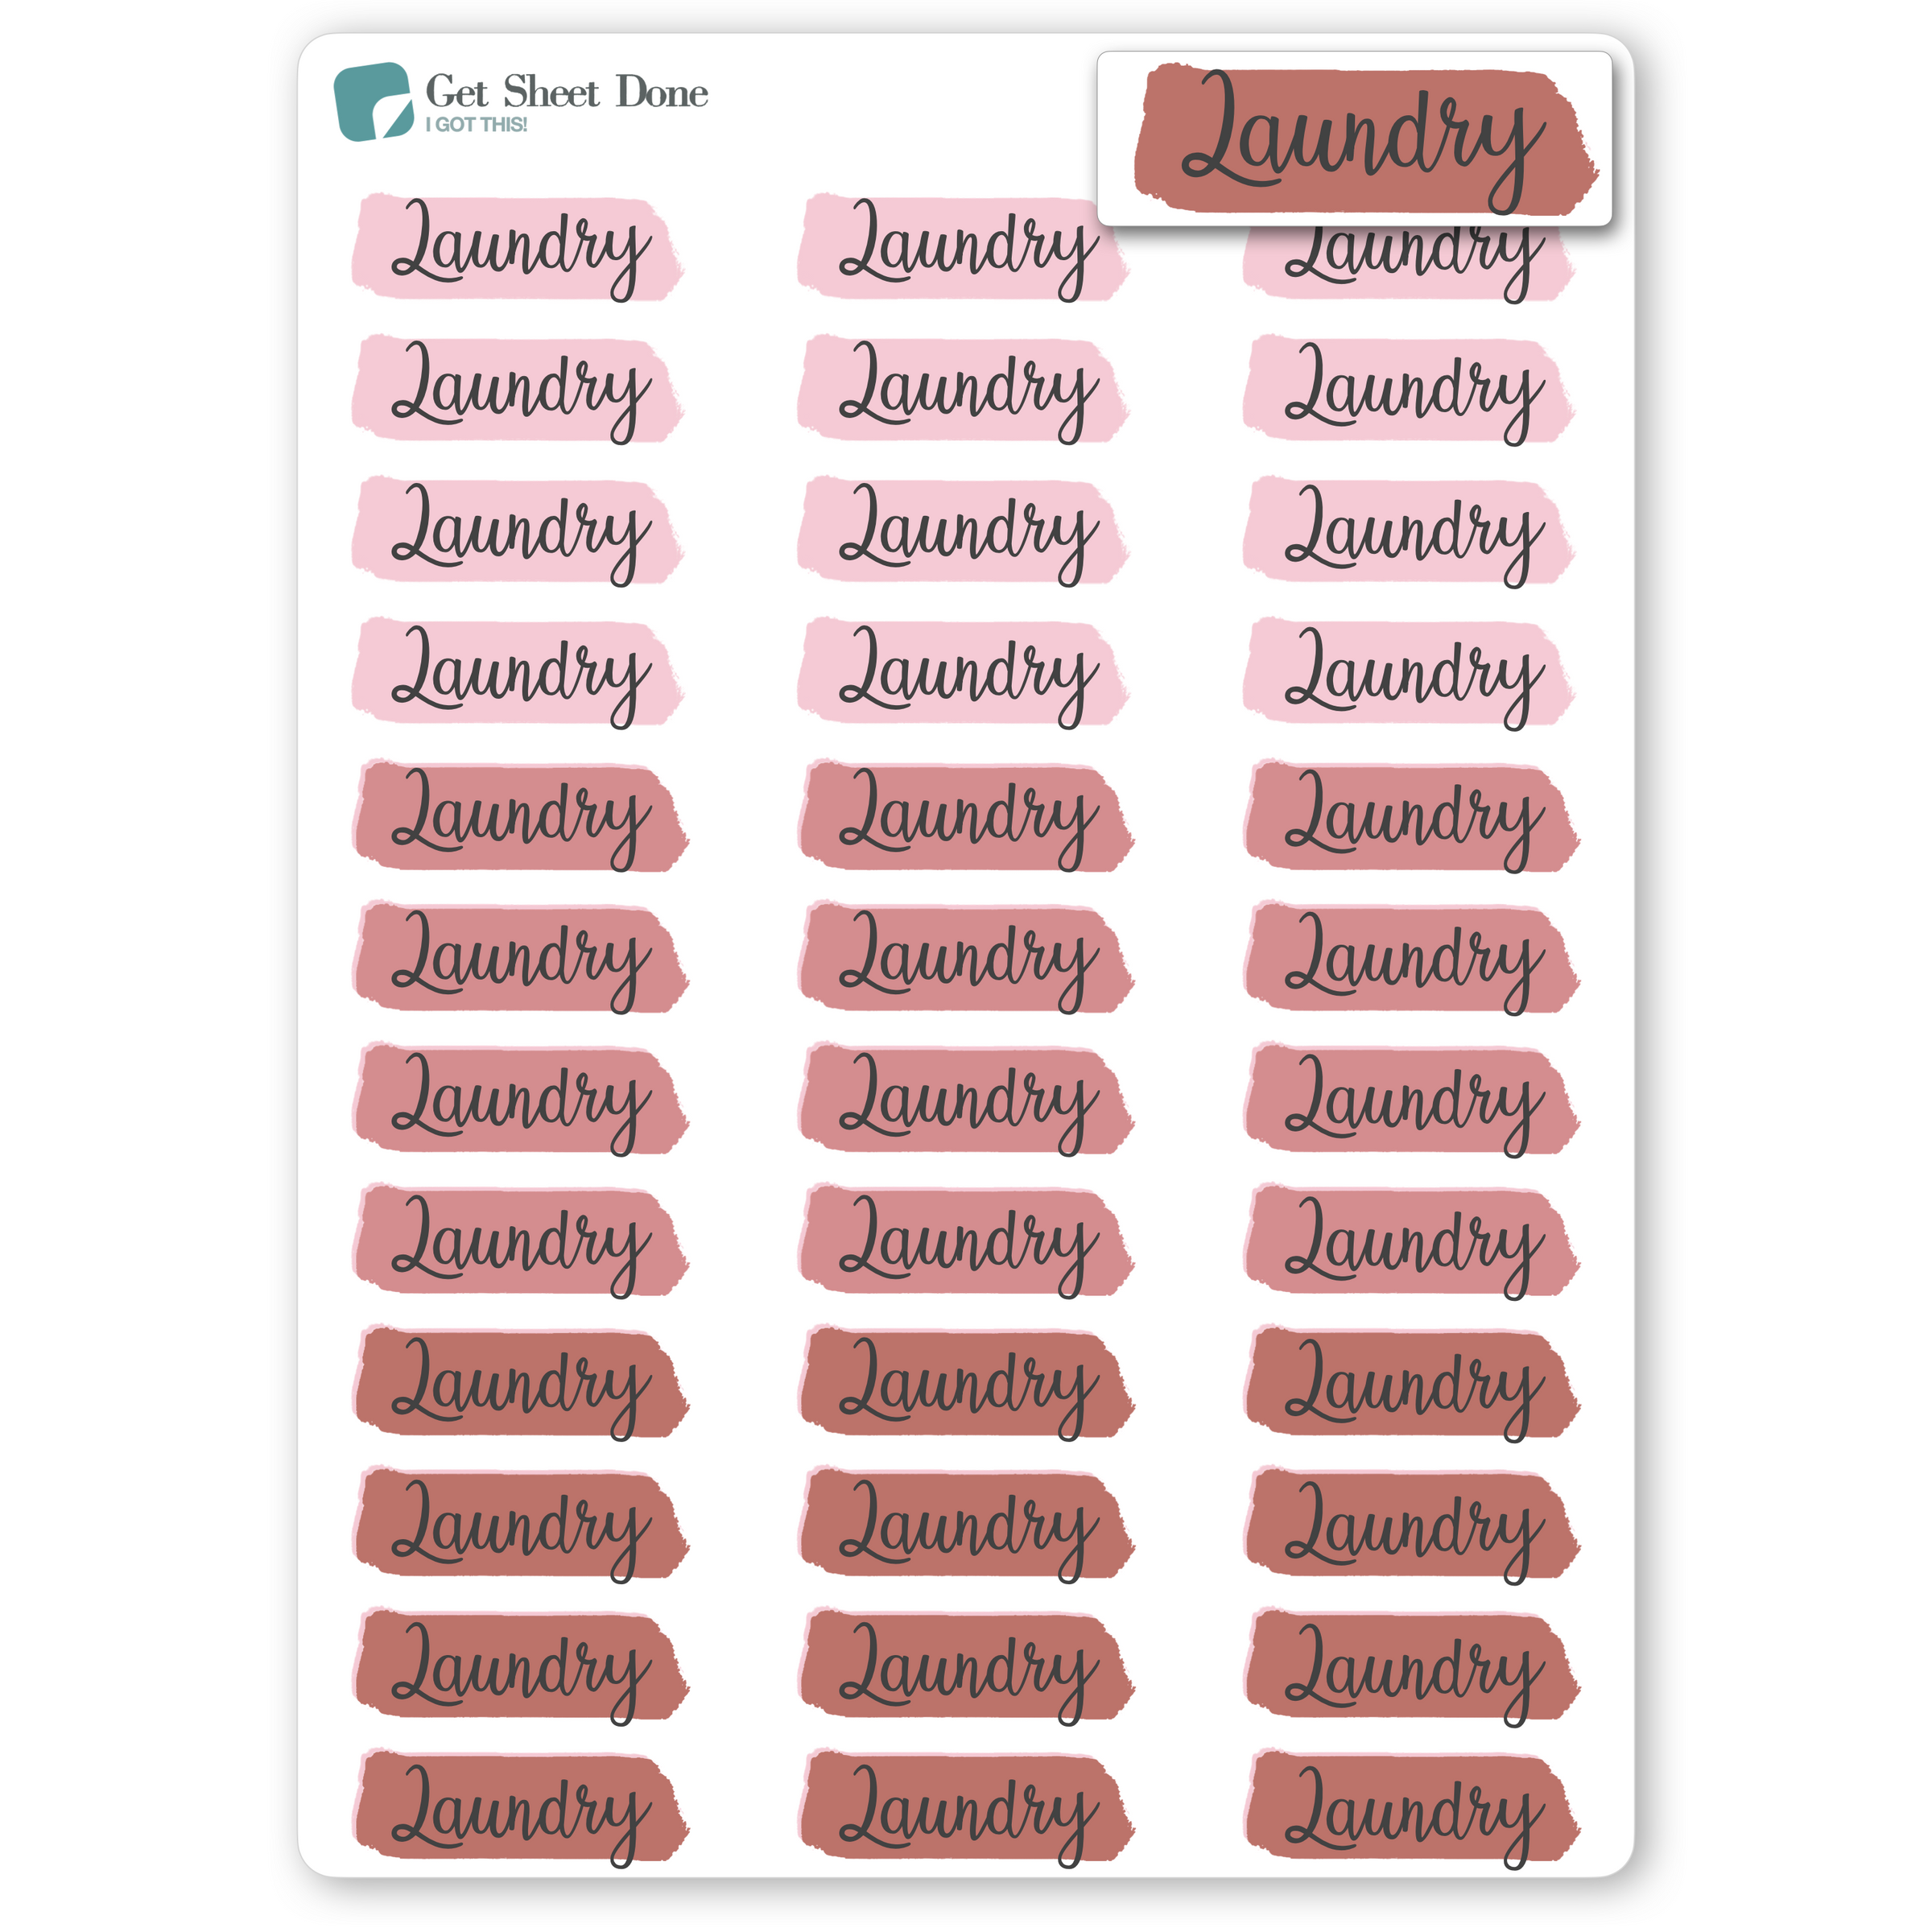 Highlight Laundry Planner Stickers / Chore Reminder Stickers/ DIY Calendar Stickers / Script Text  / Bullet Journaling / Bujo / Essential Productivity Stickers